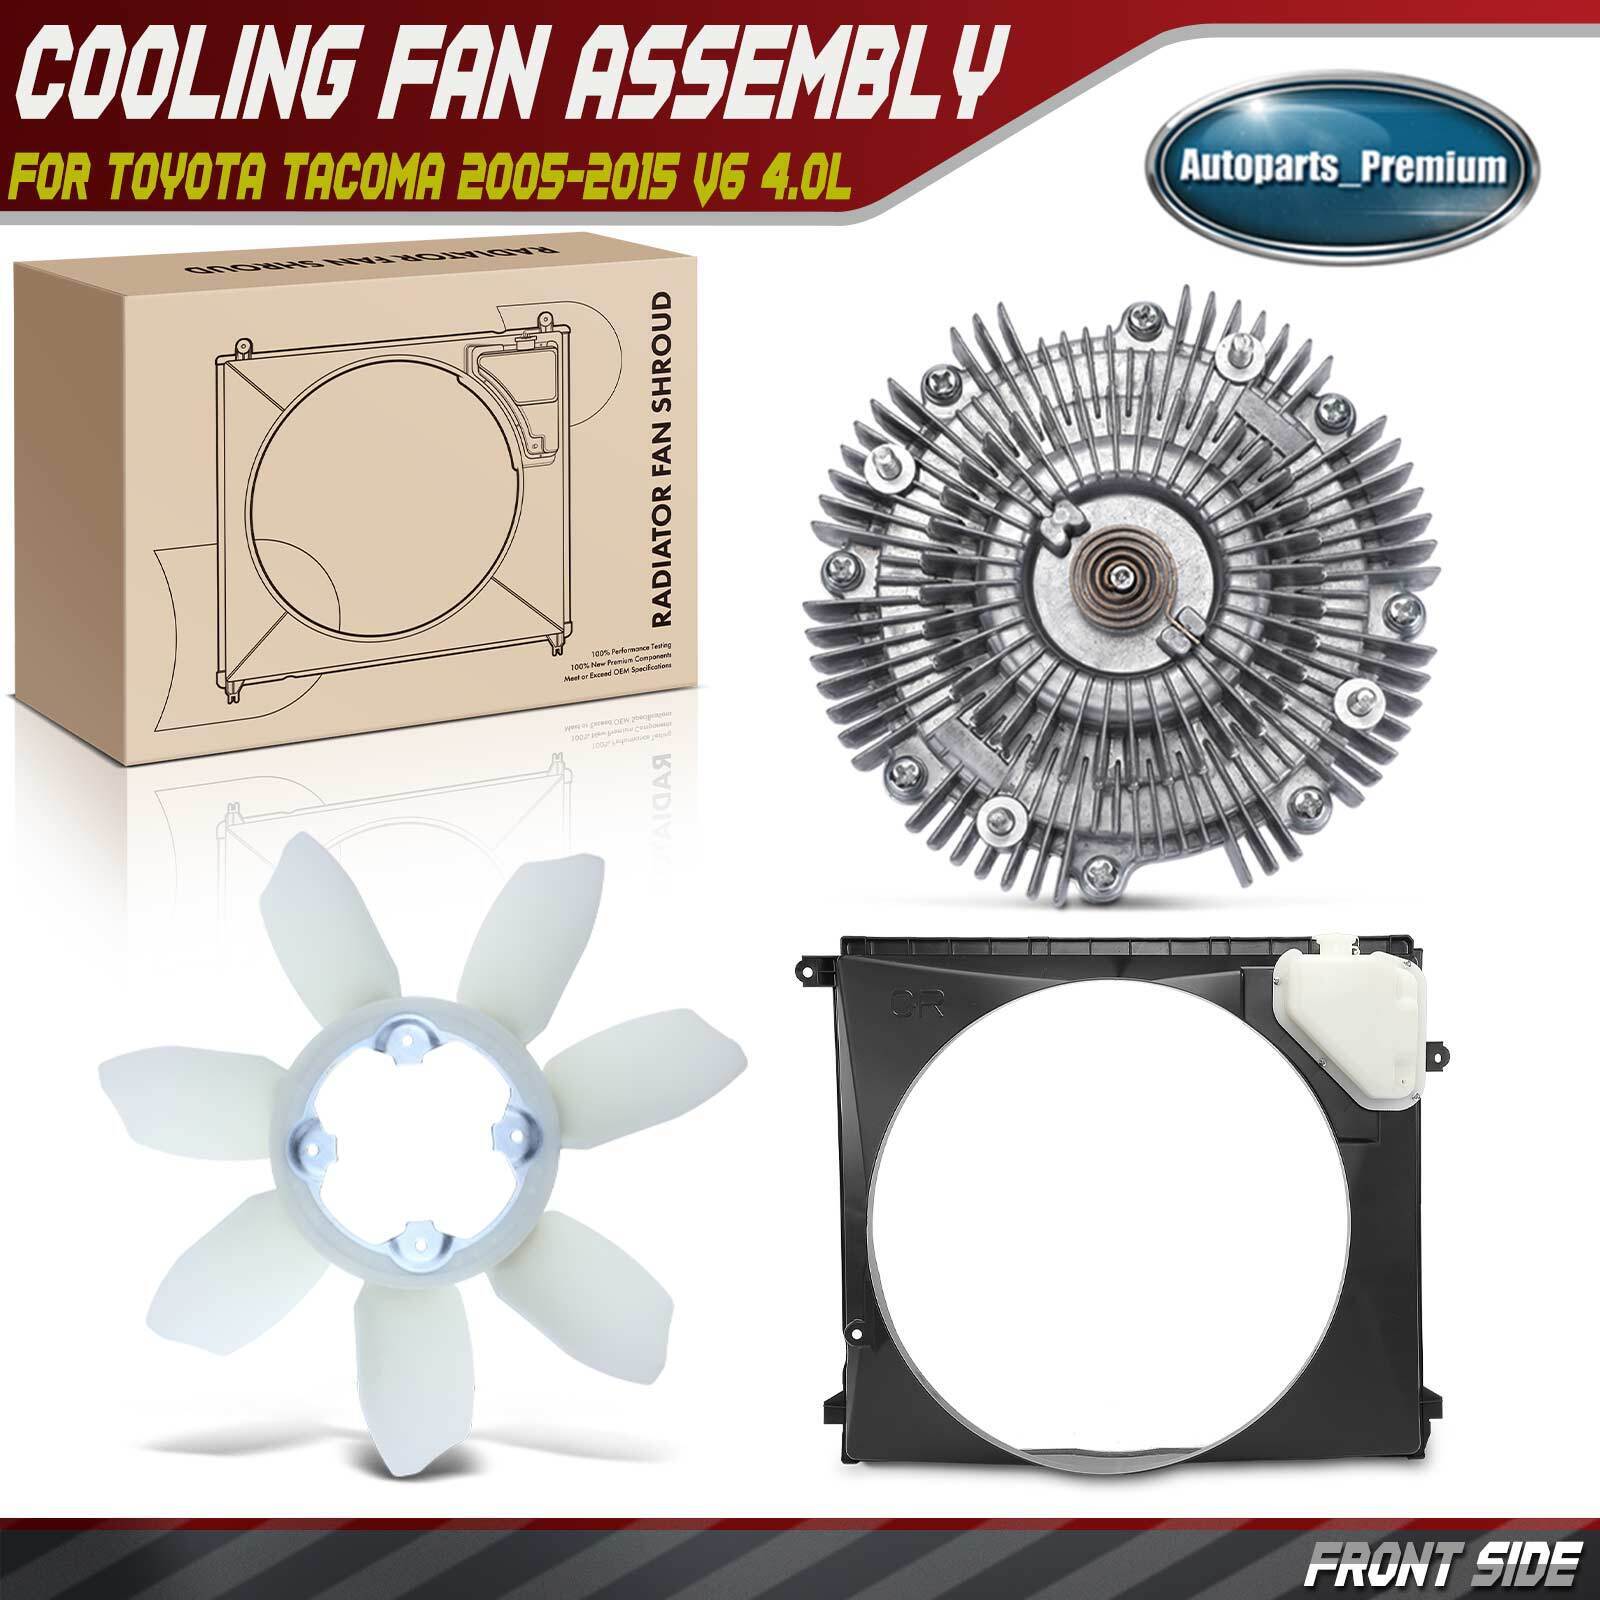 3x Front Cooling Fan Assembly for Toyota Tacoma 2005 2006 2007 2008-2015 V6 4.0L